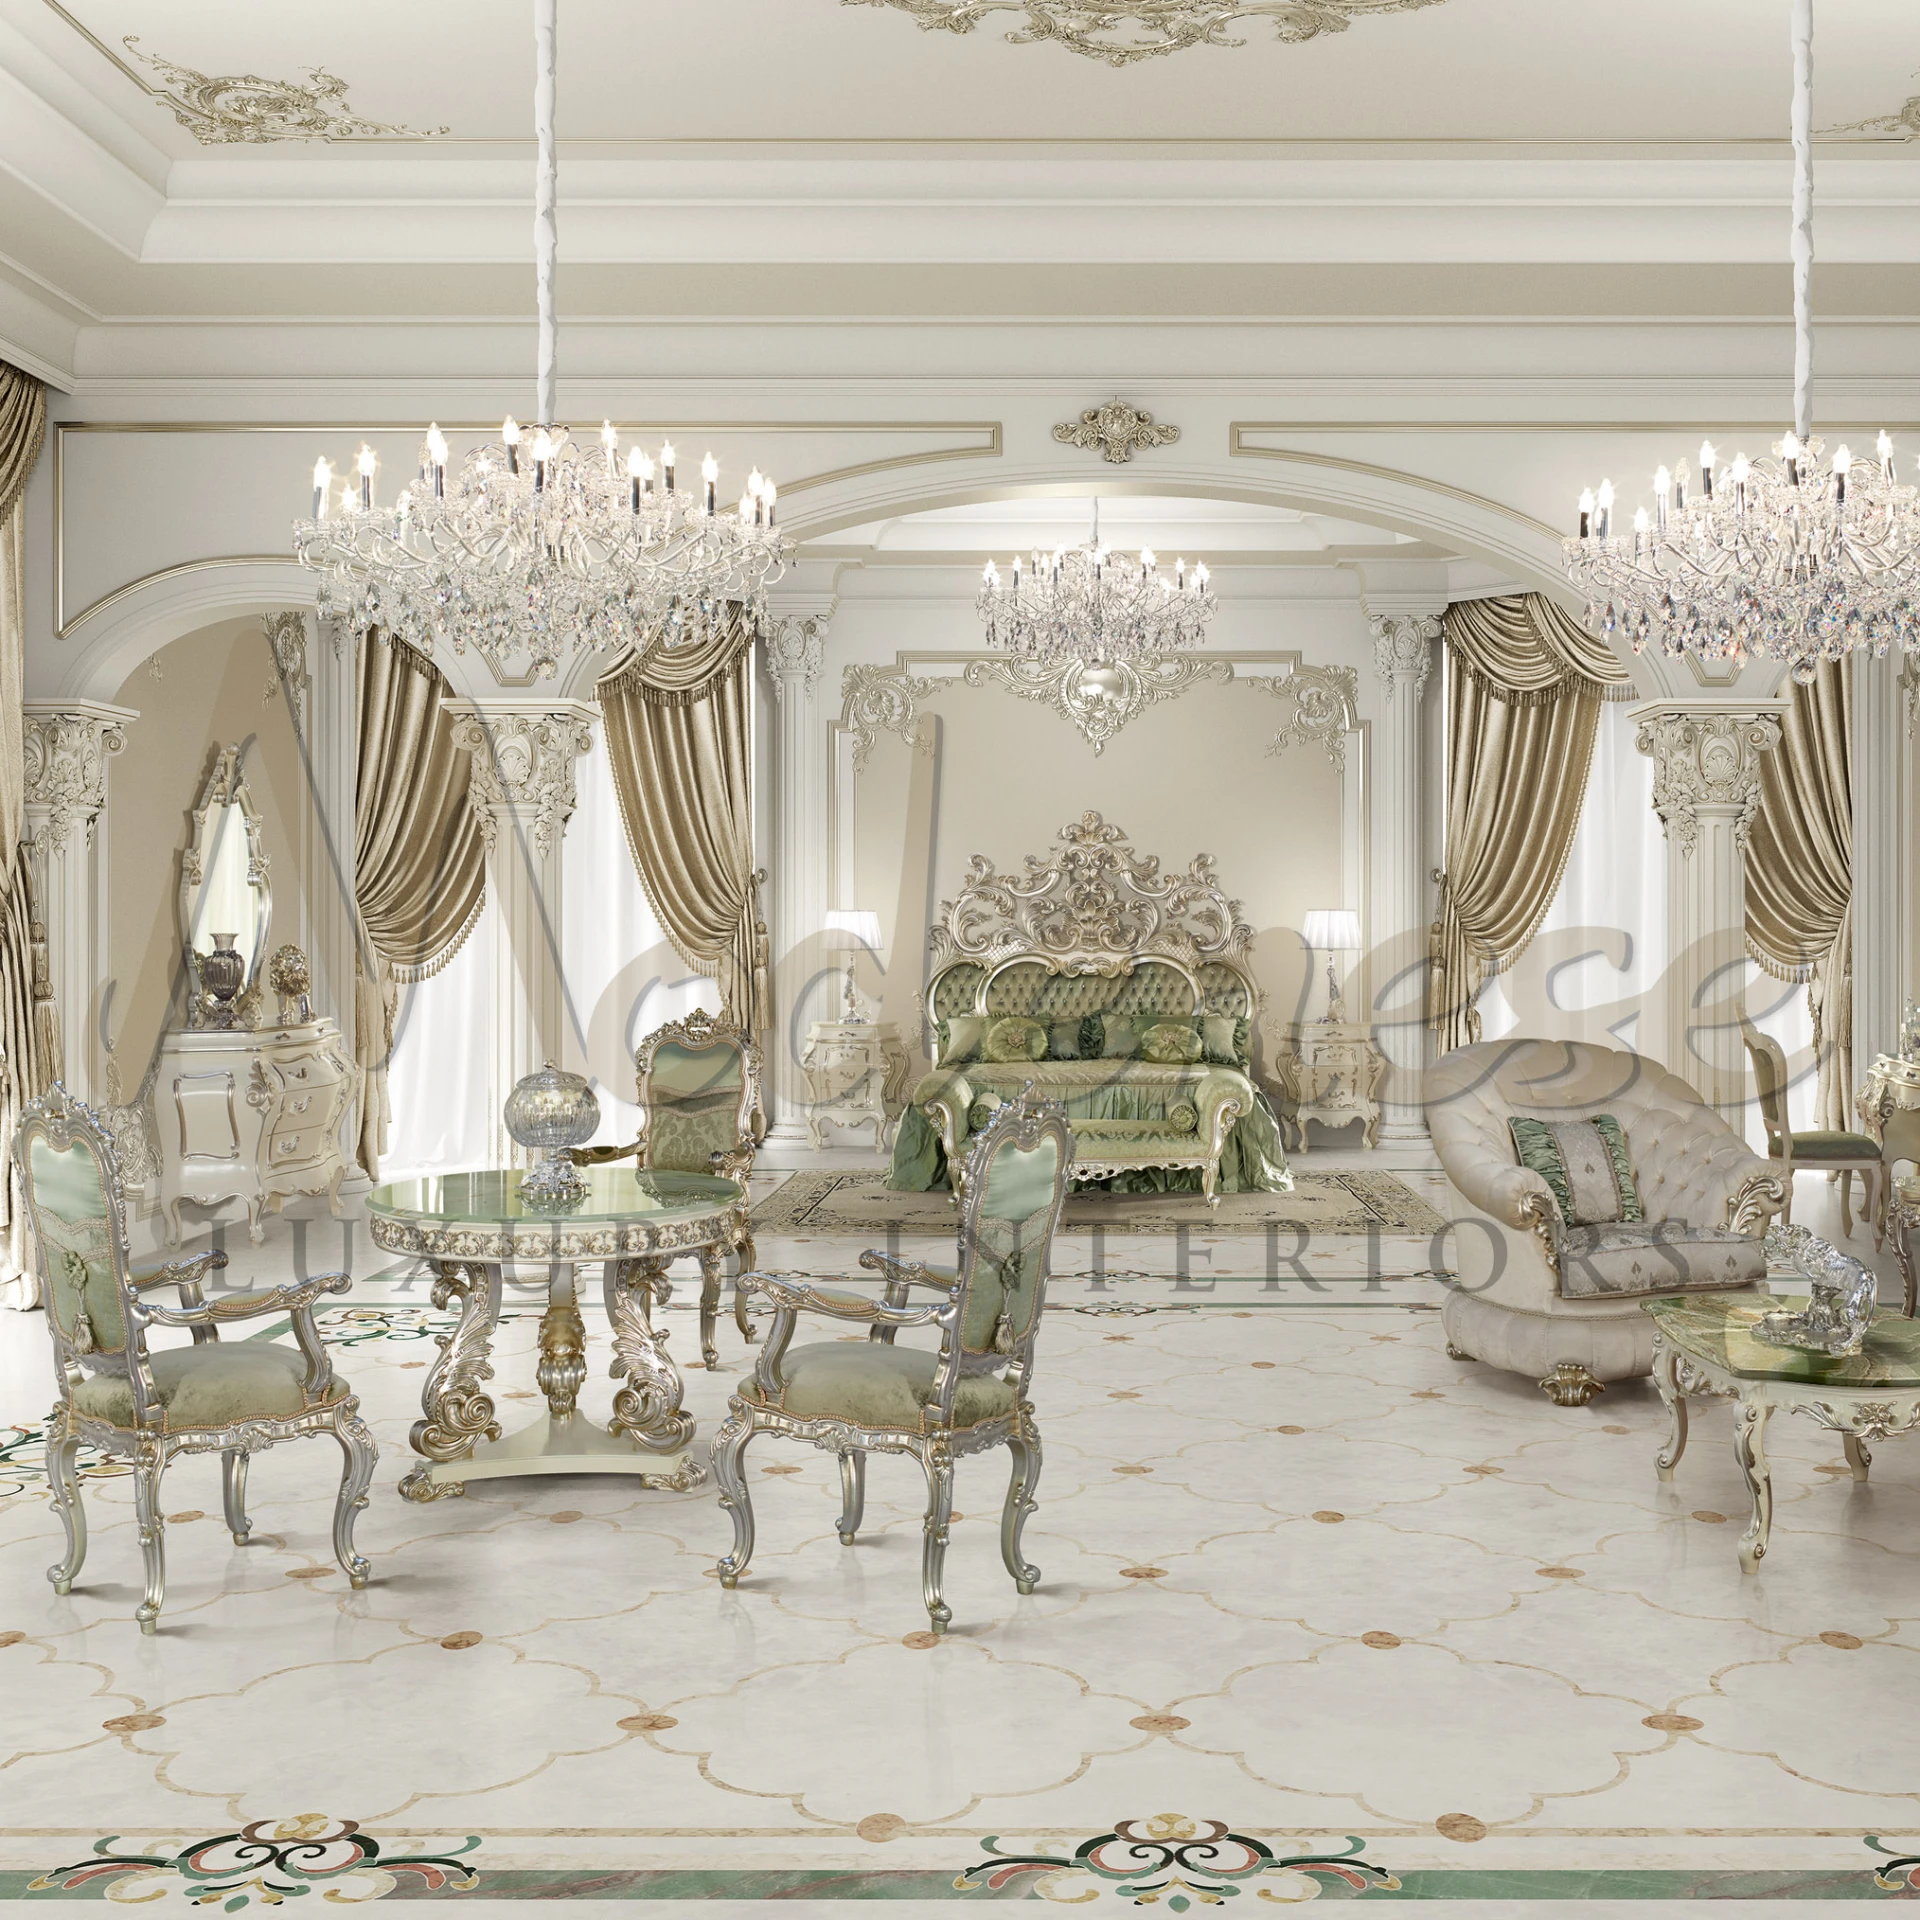 A palatial bedroom suite bathed in natural light, exuding an air of classical luxury. The room is furnished with a large, baroque-style bed featuring a silver-gilded, ornately carved headboard. 